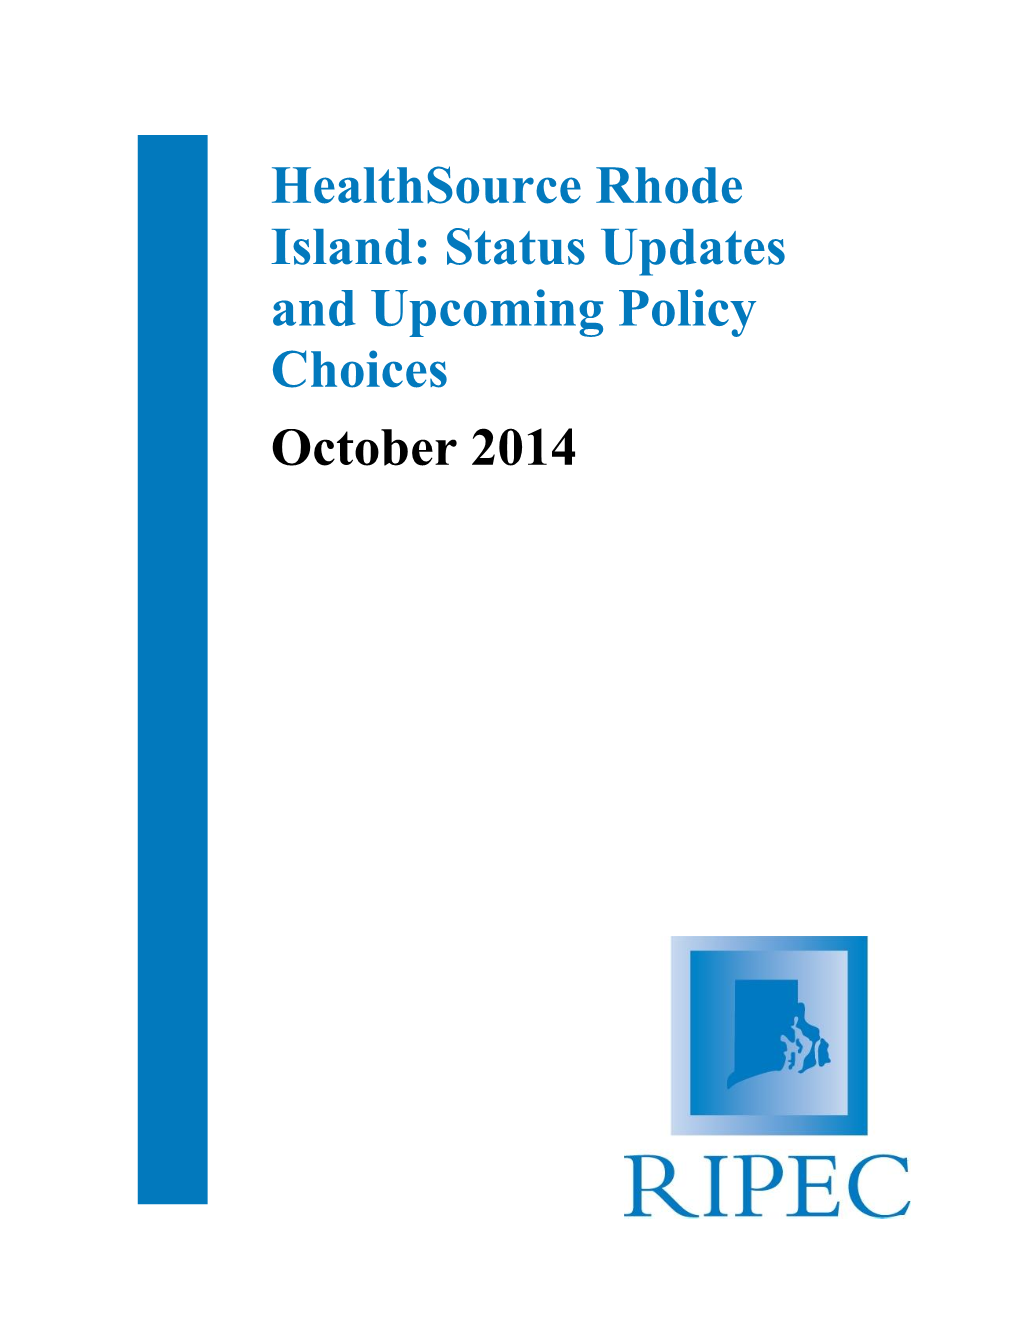 Healthsource Rhode Island: Status Updates and Upcoming Policy Choices October 2014